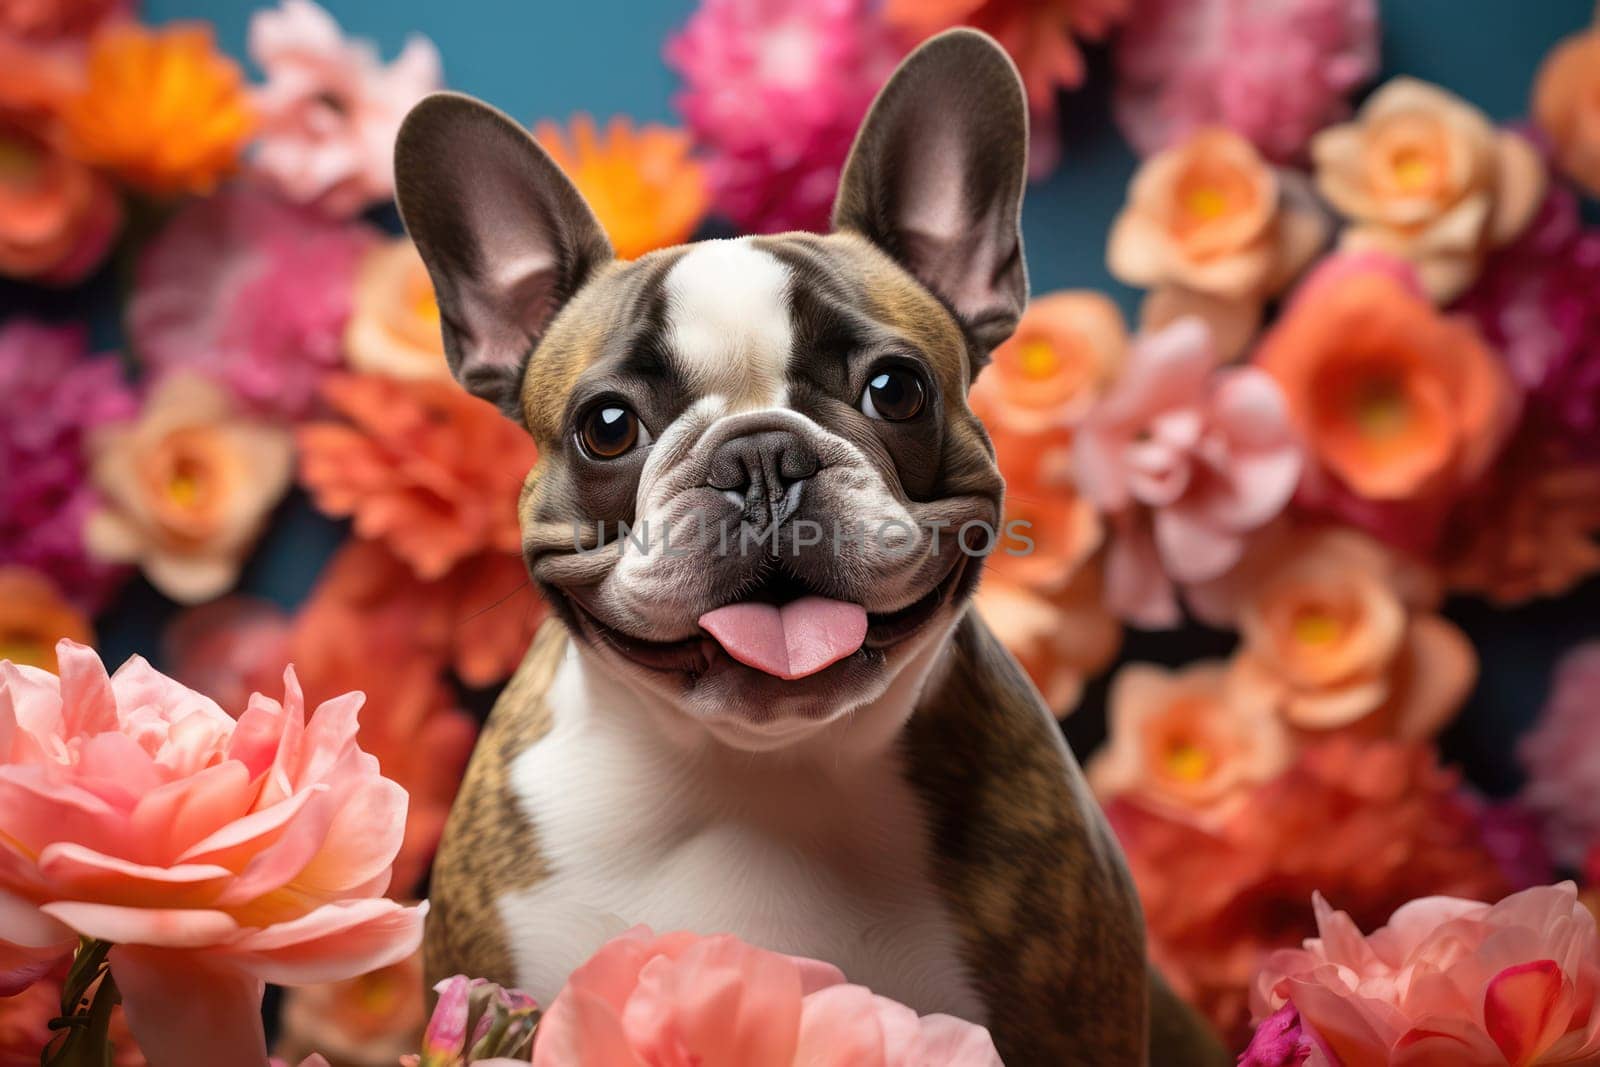 Adorable French Bulldog Puppy: Cute and Playful Companion in a Colorful Spring Garden